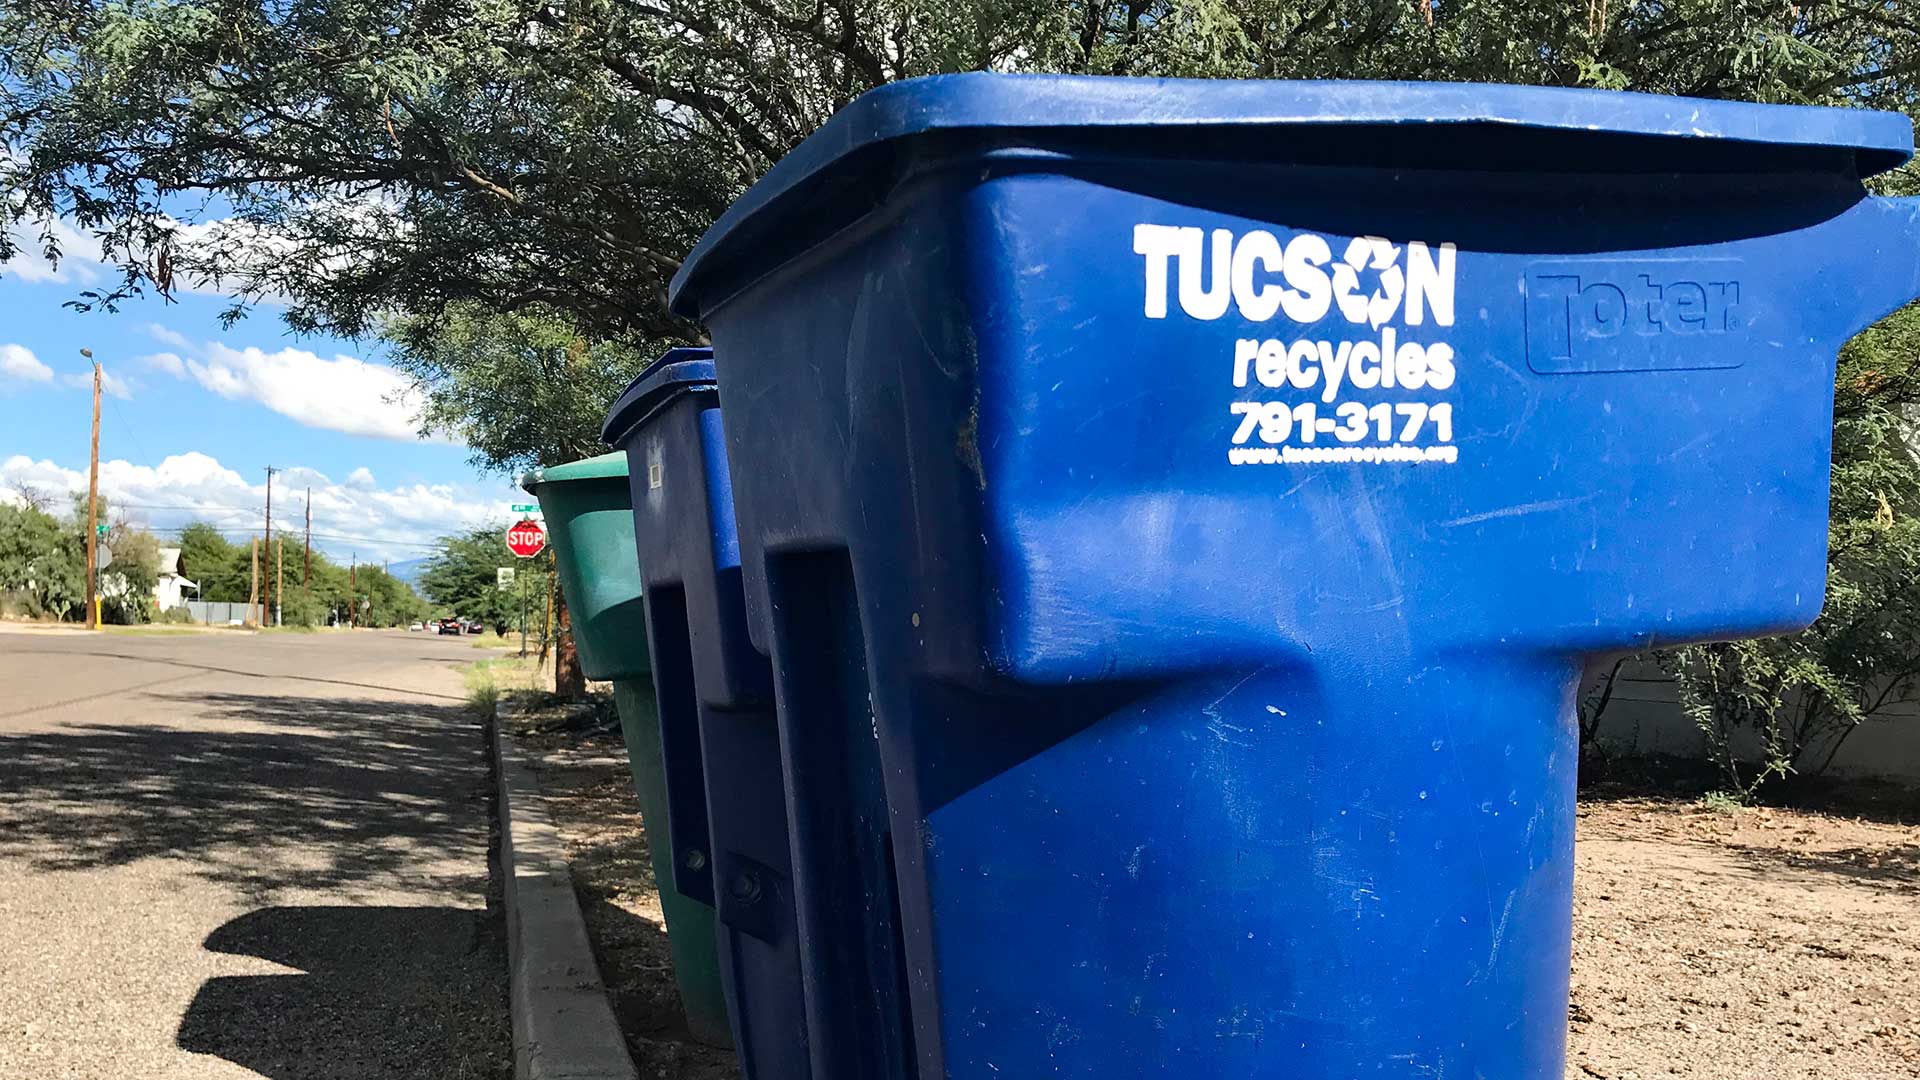 Recycling on Tucson's curbs and beyond